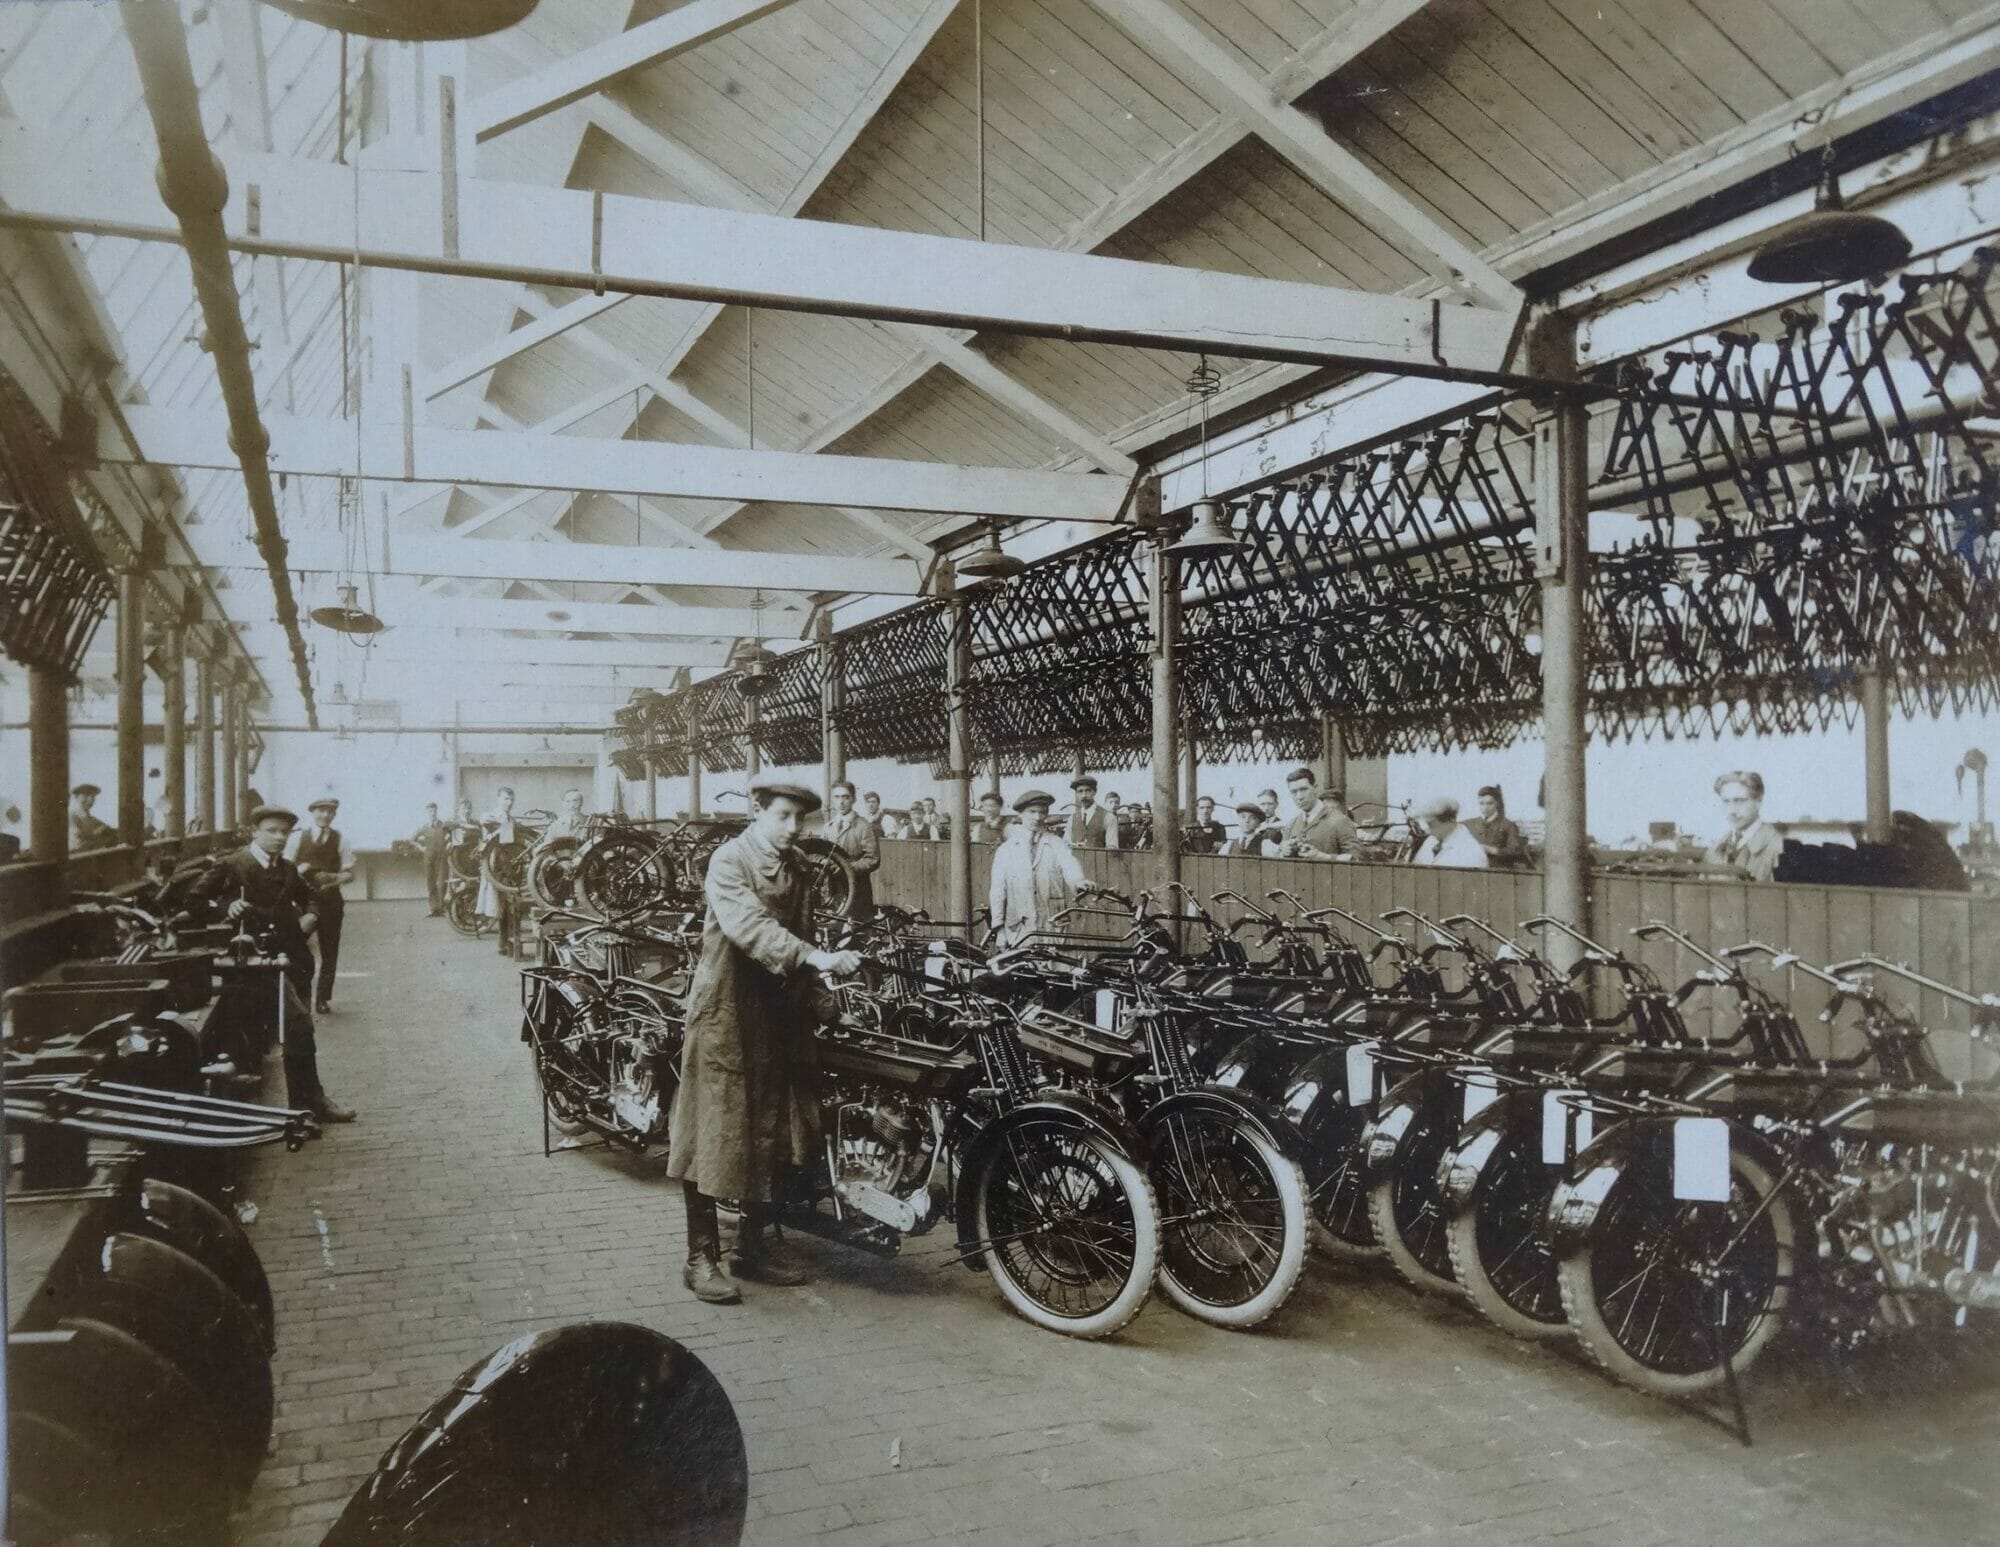 Early 1920s motorcycle assembly shop.